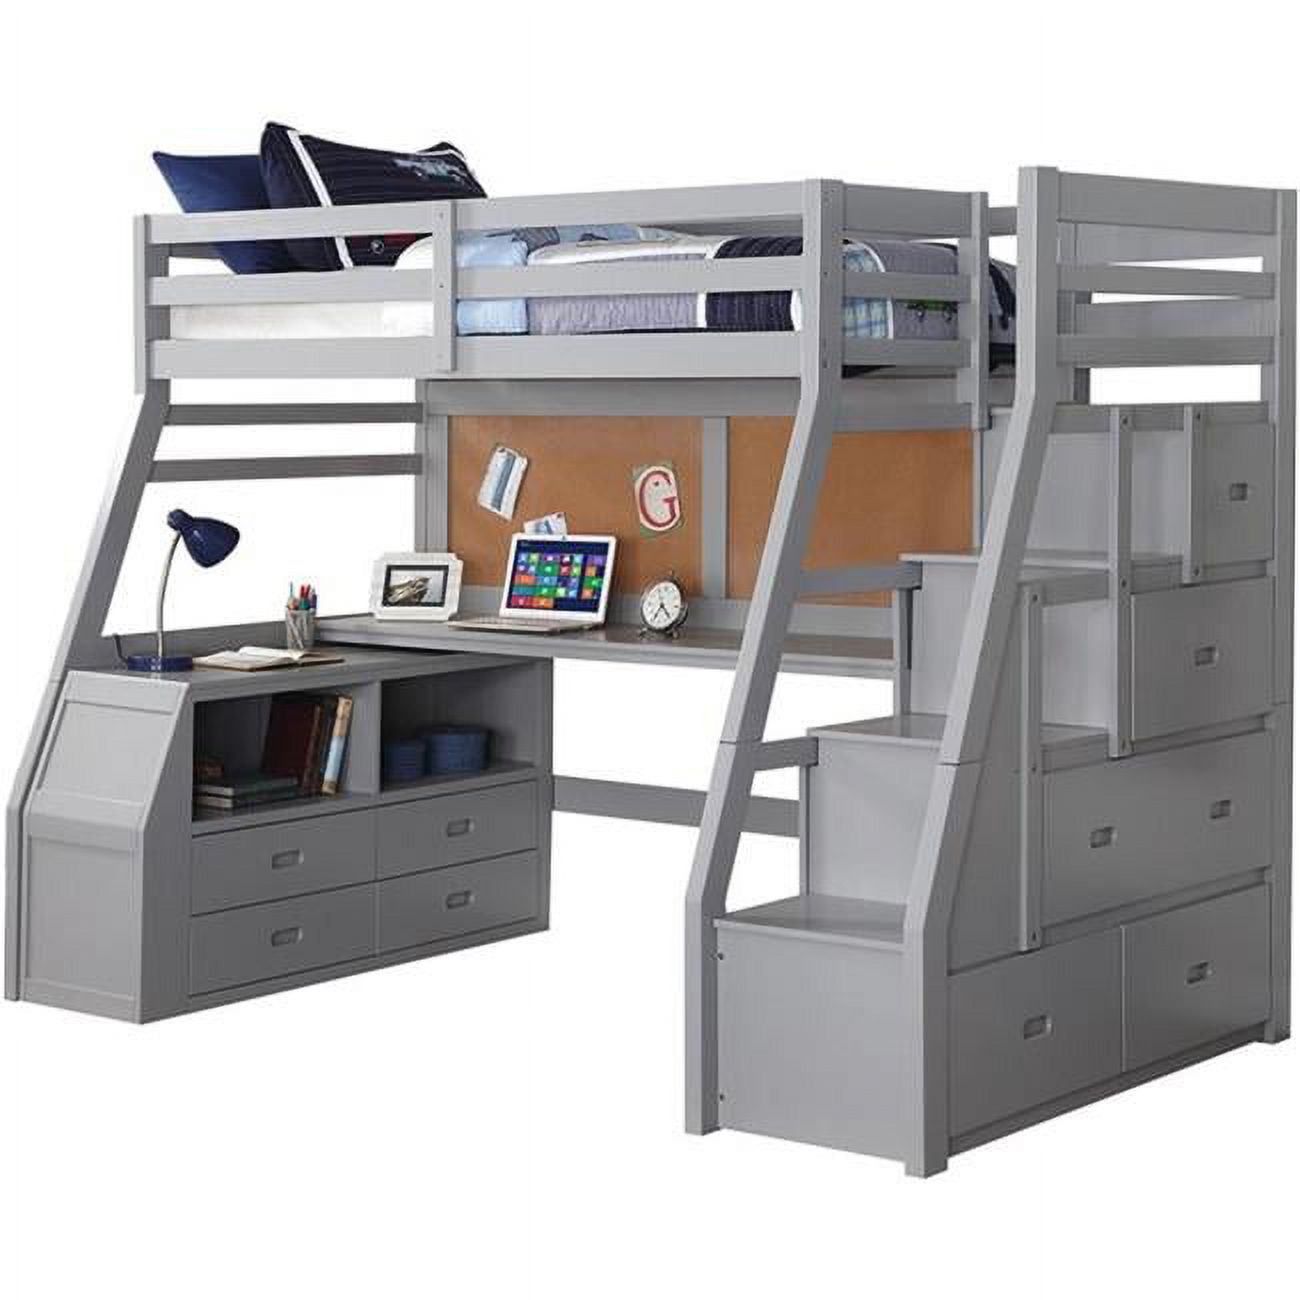 HomeRoots Uptown Pine Wood Loft Bed, Full, Gray - image 1 of 4